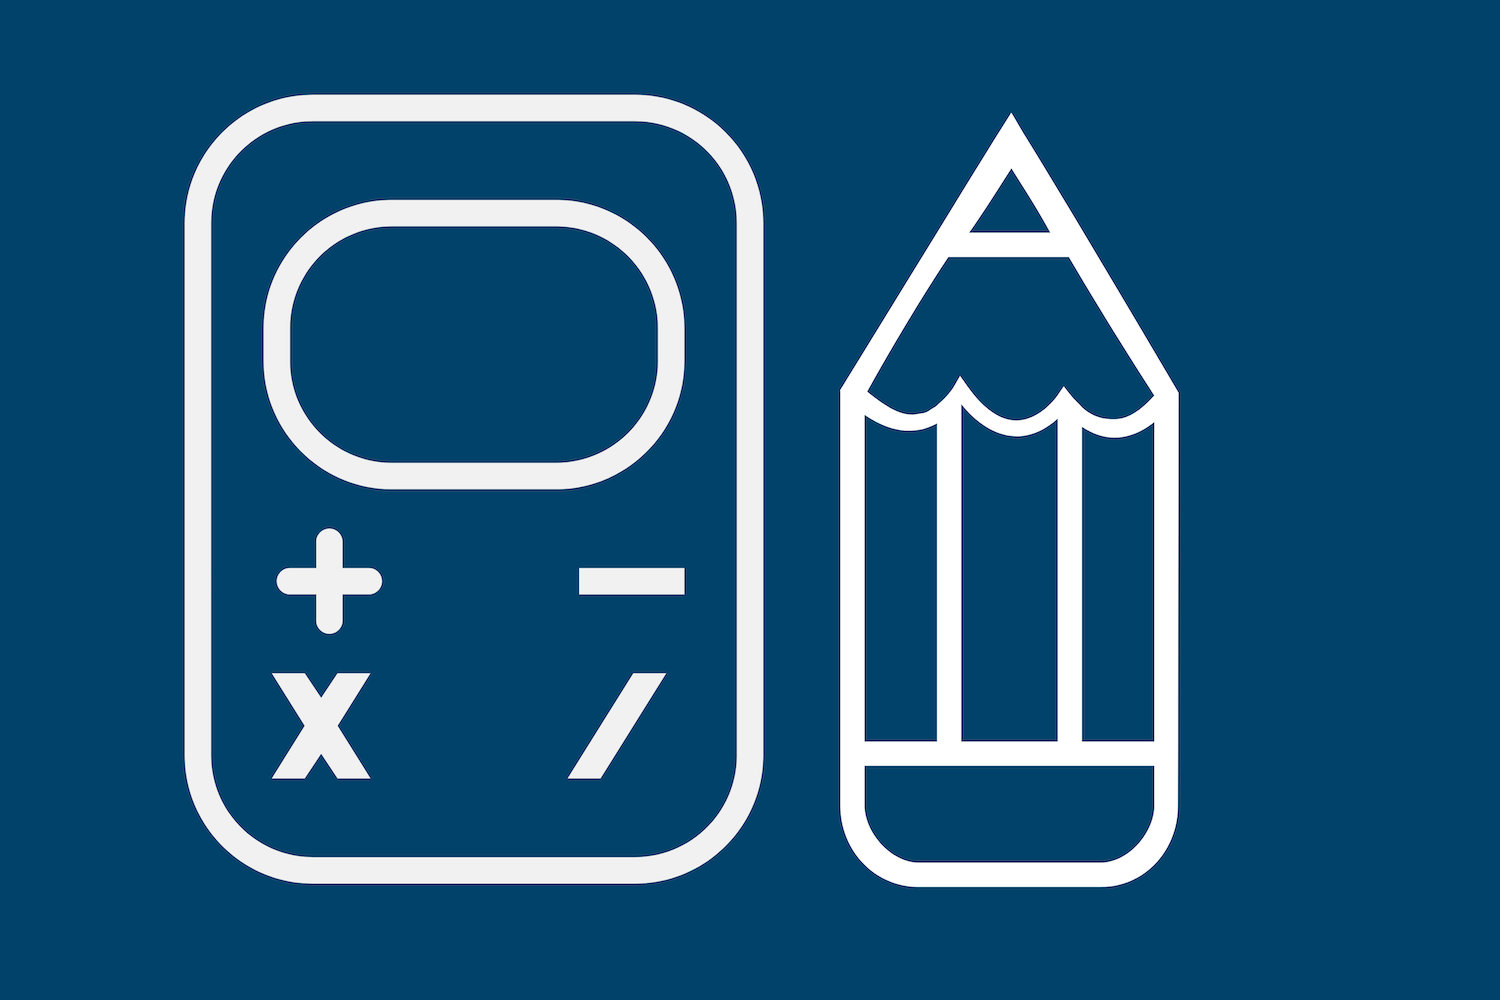 White icons of a calculator and pencil on a blue background